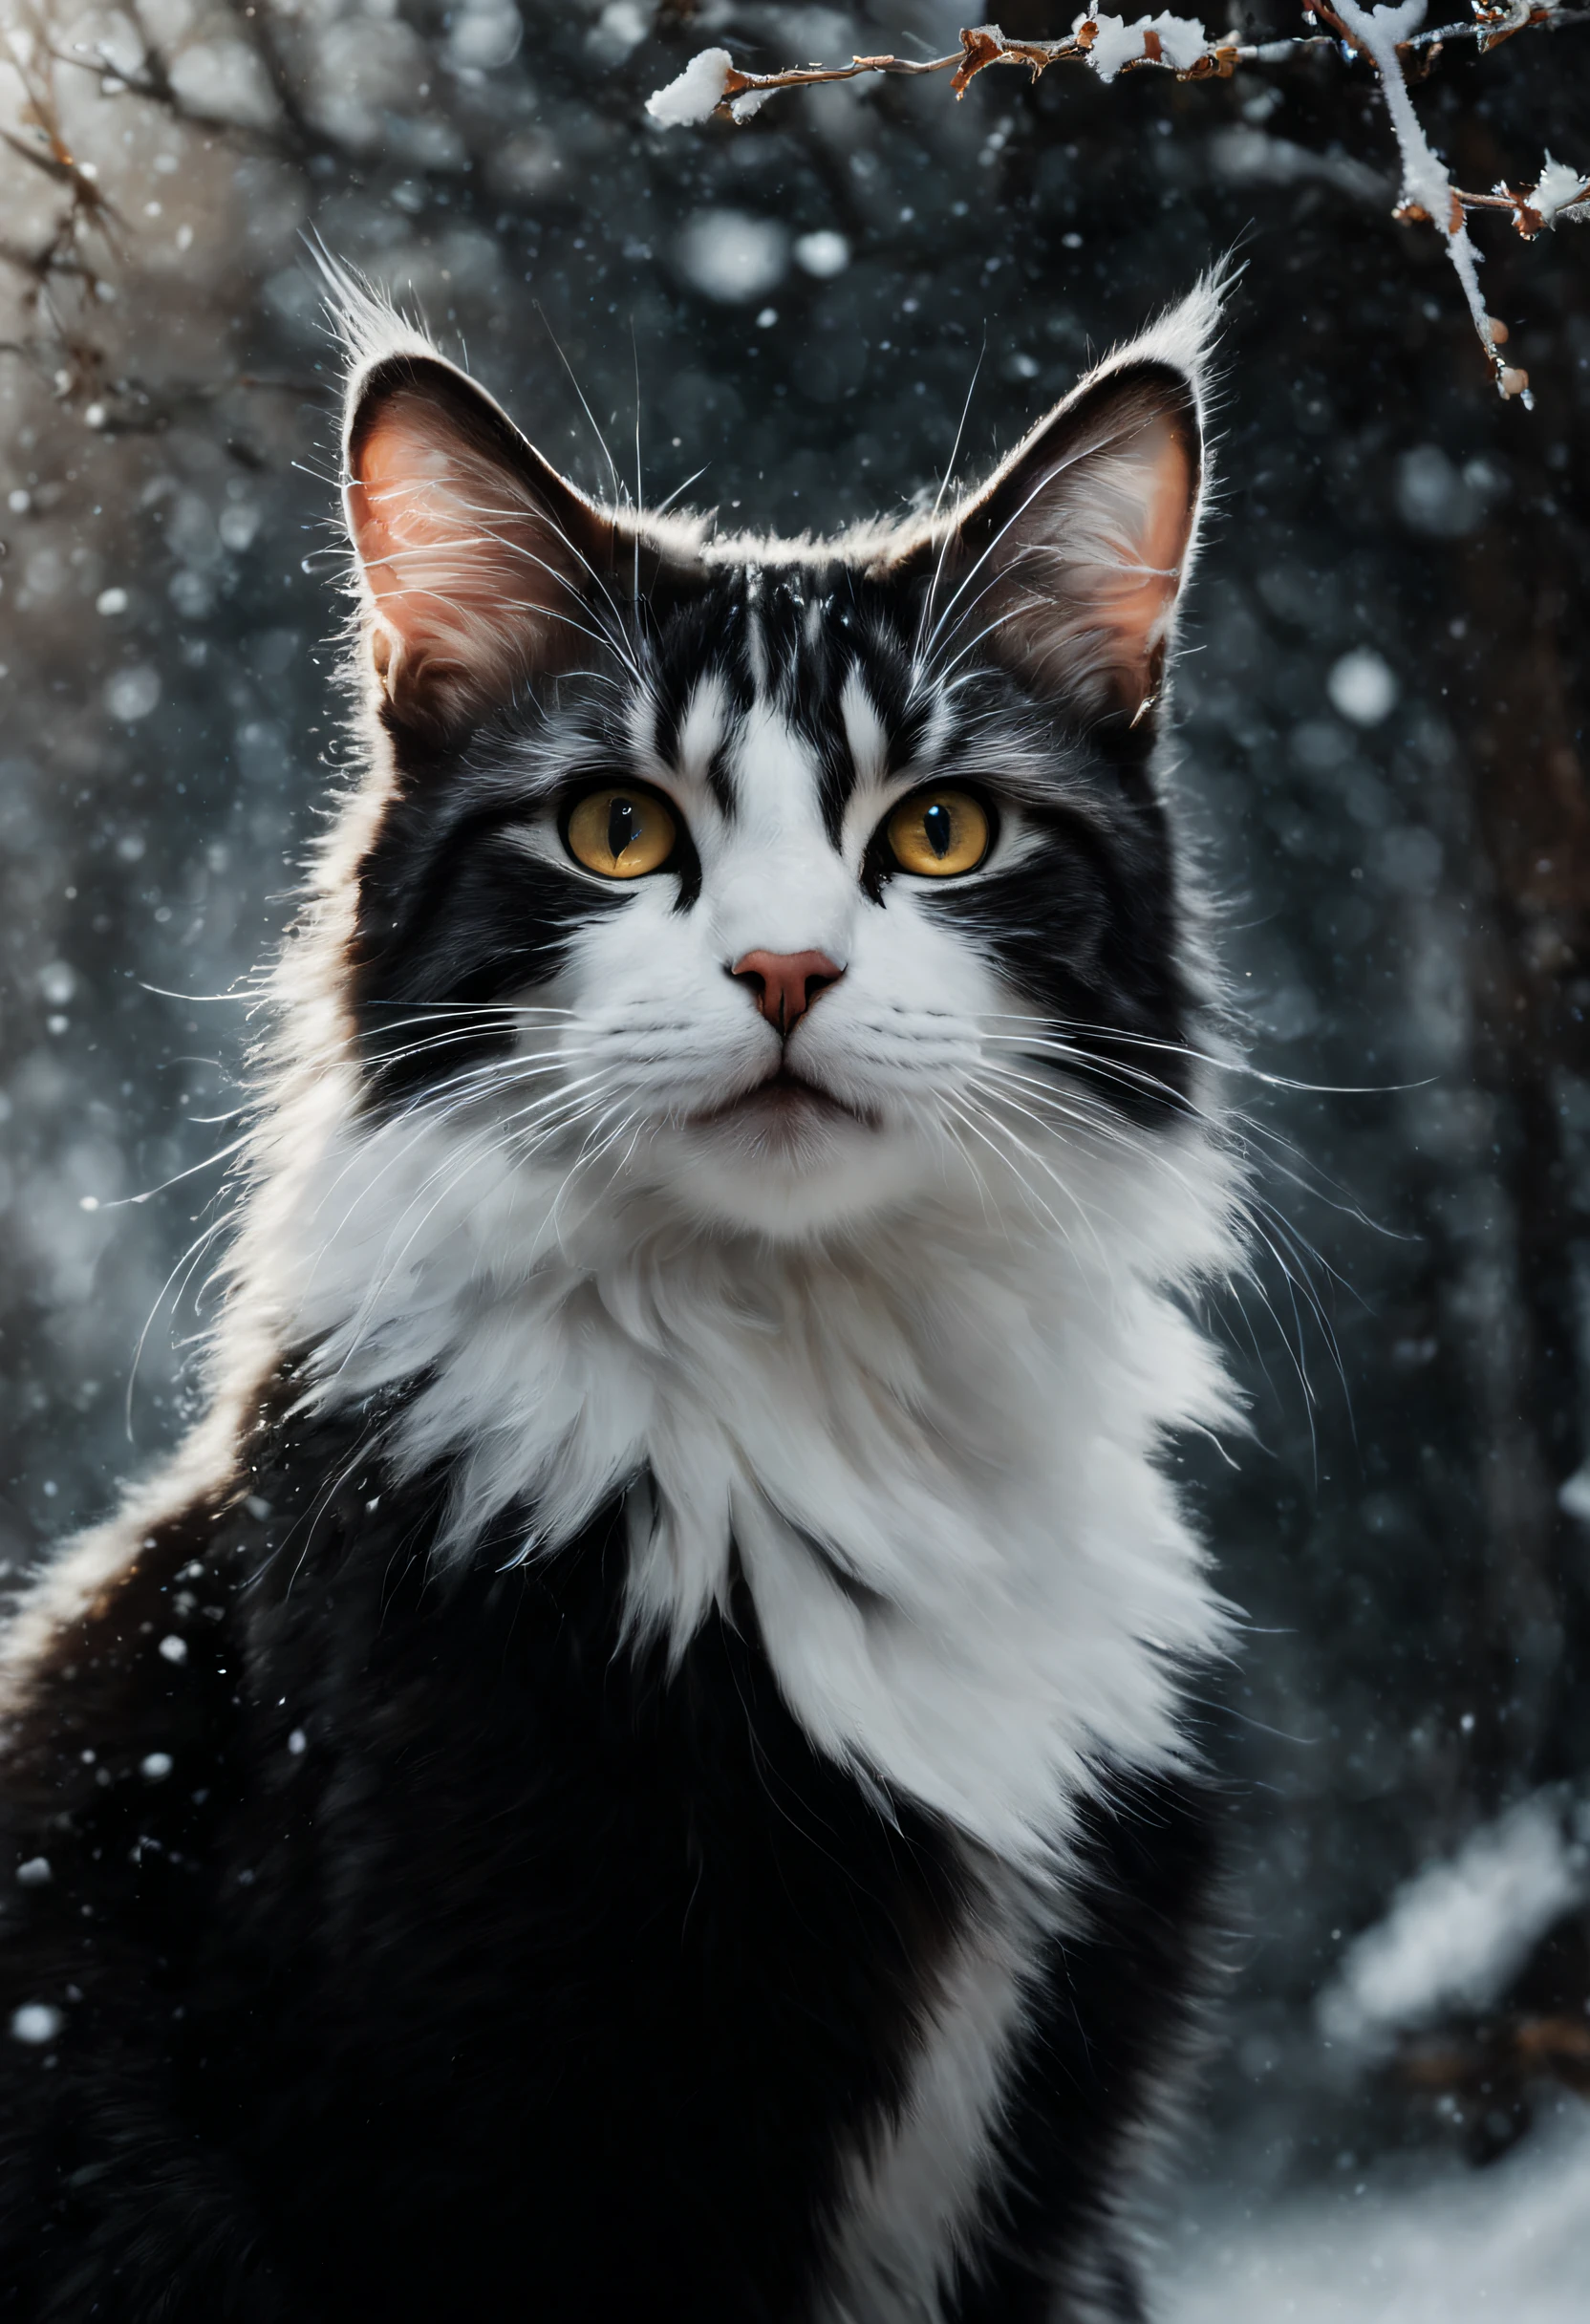 mj, RTX, 4k, HDR, Anna Razumovskaya, Casey Baugh, Antonio Mora, Aminola Rezai, Giovanni Boldini, art, realistic art. cat, first snow, flakes, partial snow cover, film still, breathtaking, falling leaves, melancholic mood, nature's farewell in the rustling of gusts of wind, photorealism, film grain, film still, bokeh, intricate detail, perfect composition, beautiful detailed complexity Insanely Detailed Octane Rendering, 4k Fine Art Photography, Photorealistic Concept Art, Soft Natural Volume Cinematic Perfect Light, Chiaroscuro, Award Winning Photography, Masterpiece, Oil on Canvas,